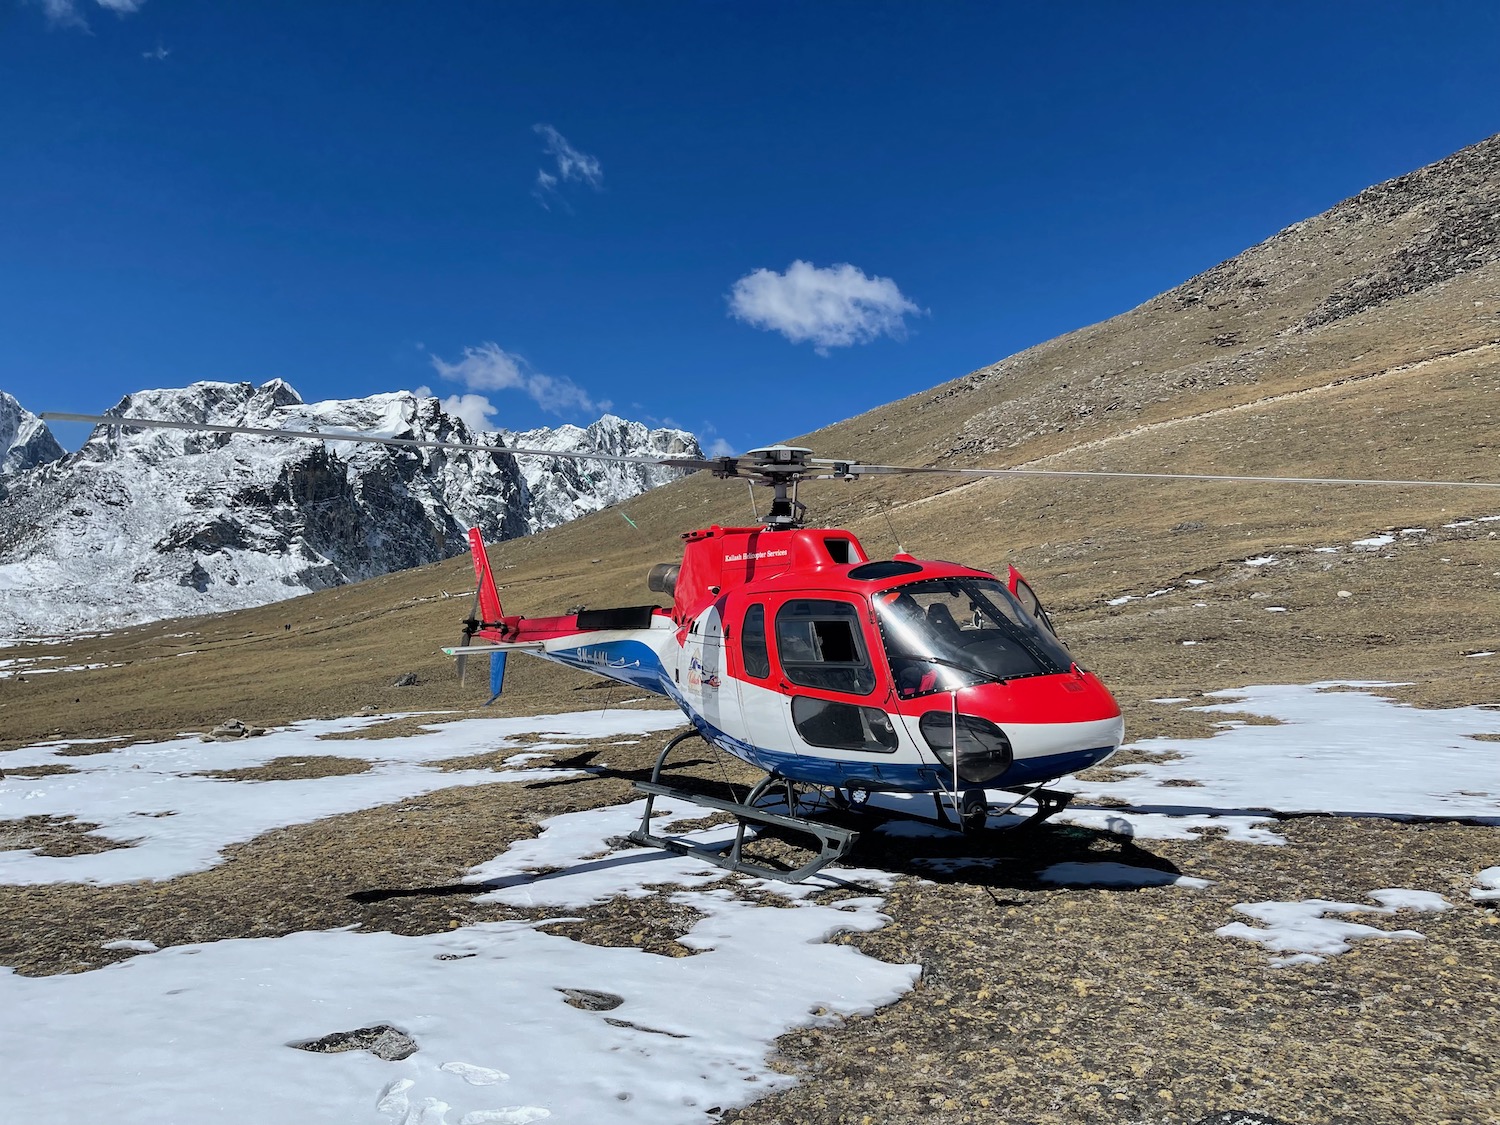 A red and white helicopter on a snowy mountain